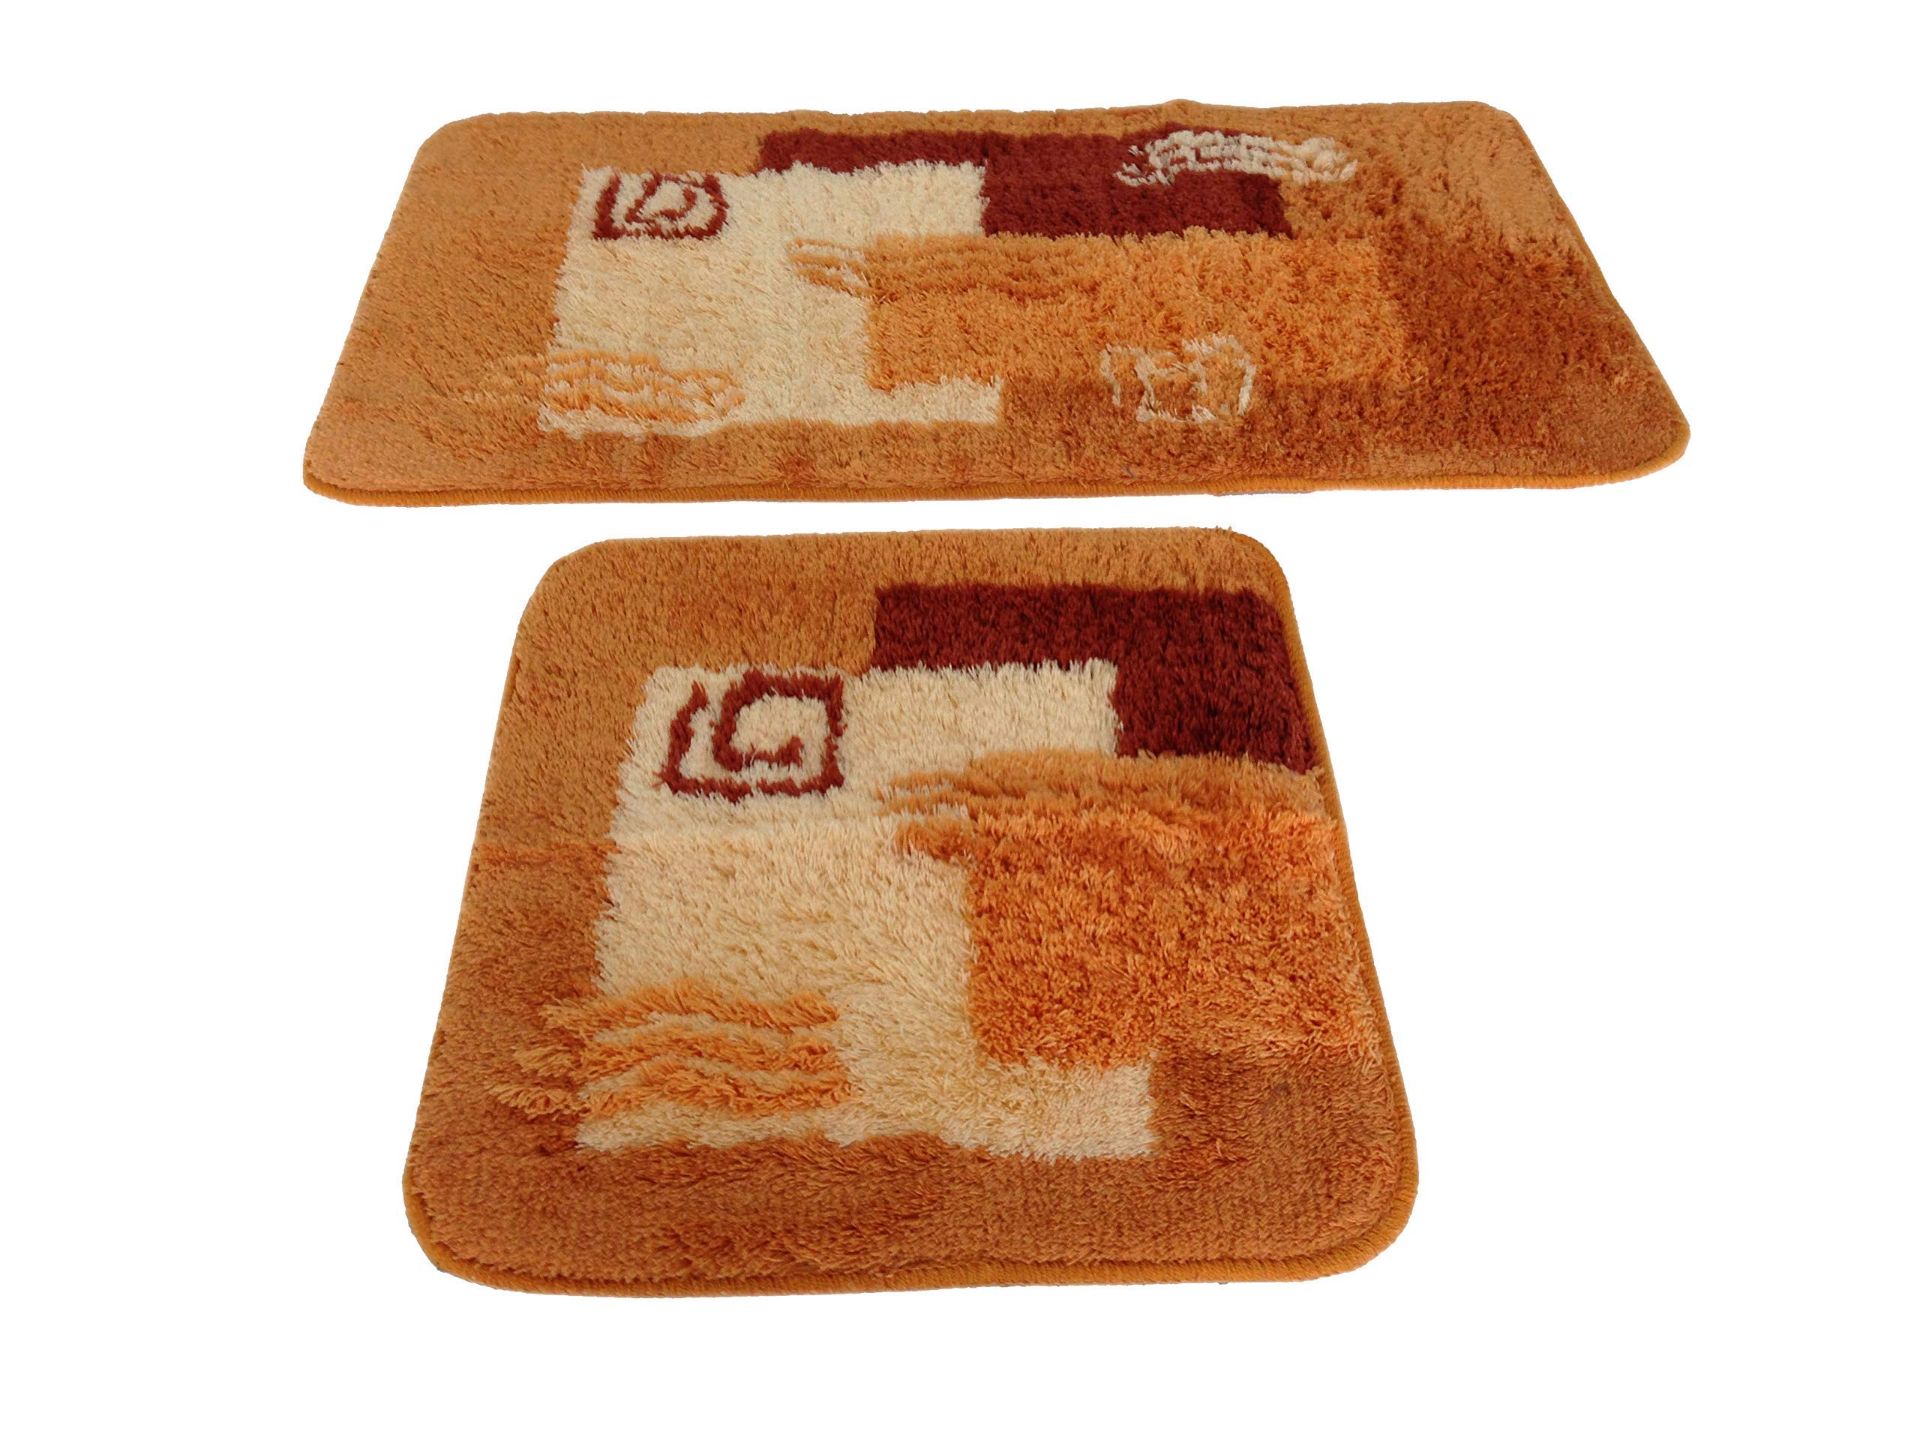 Goodway 2 Pc Bath Mat Set (Delivery Band A)